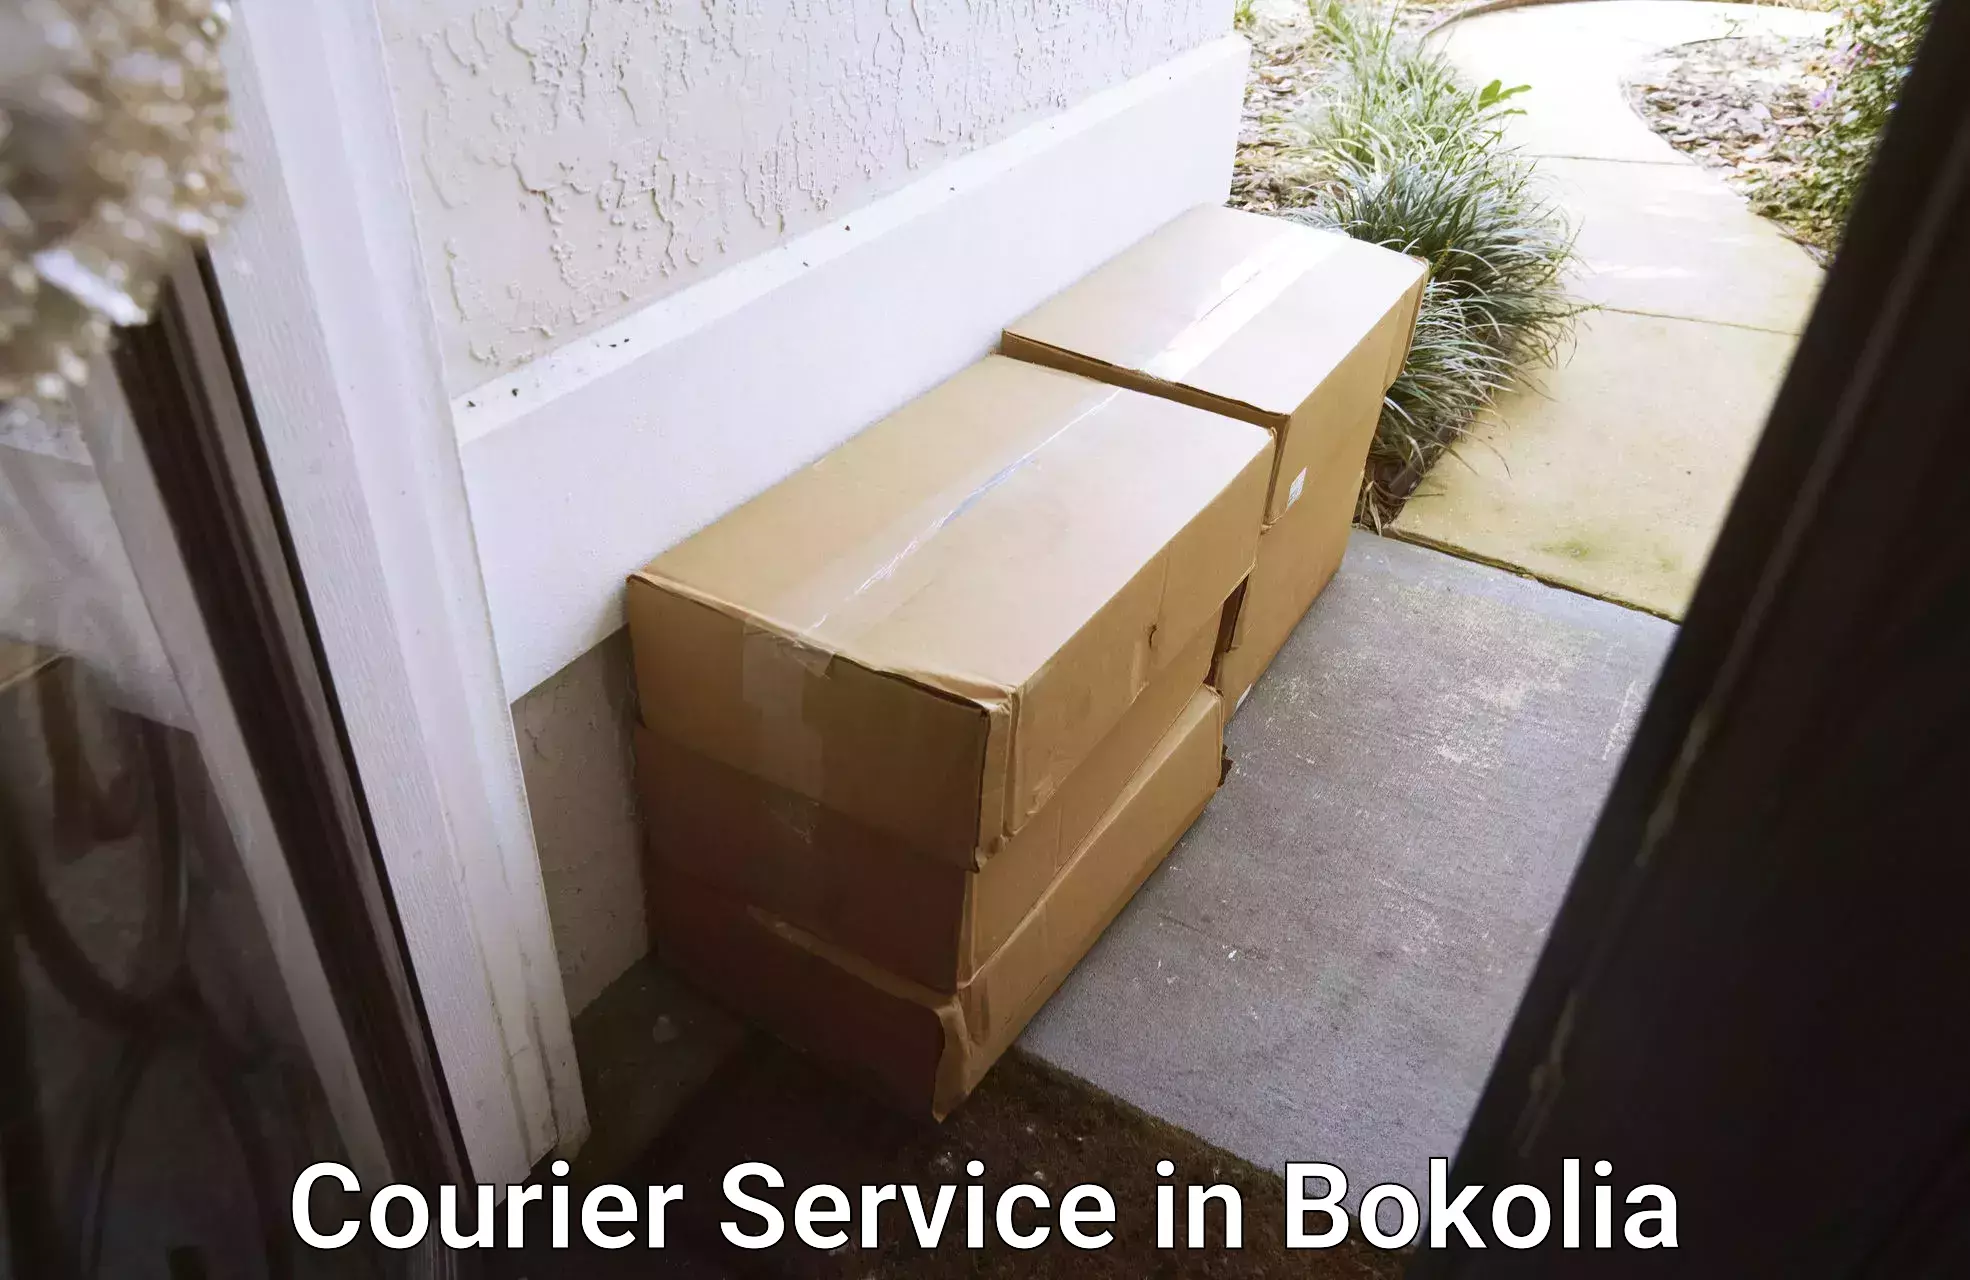 Parcel delivery automation in Bokolia